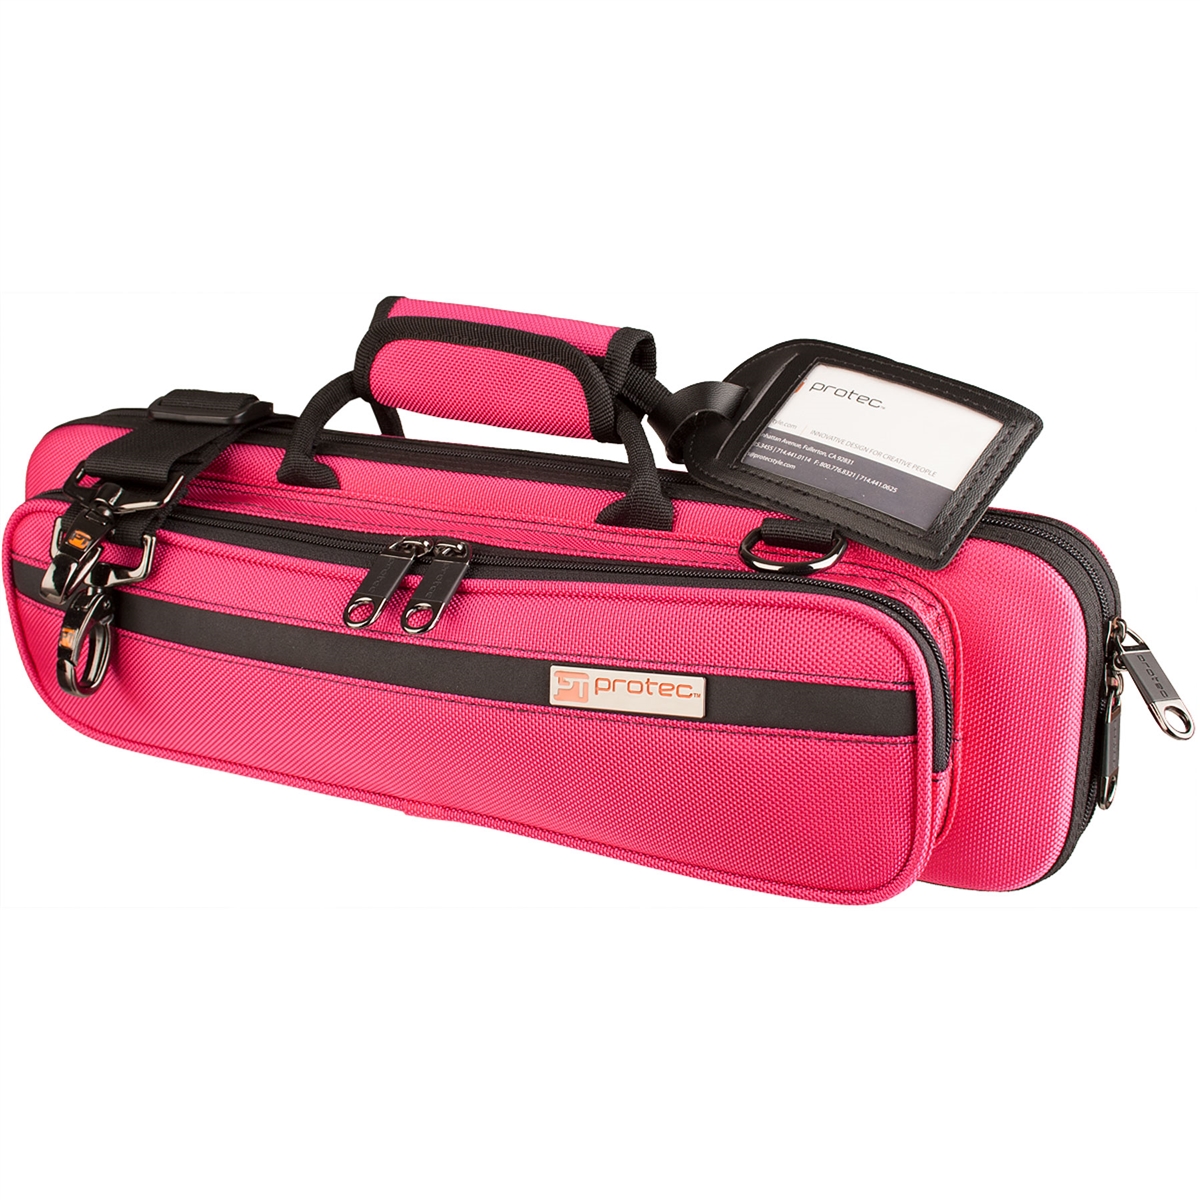 Protec PB308-HP Case for Flute - Hot Pink